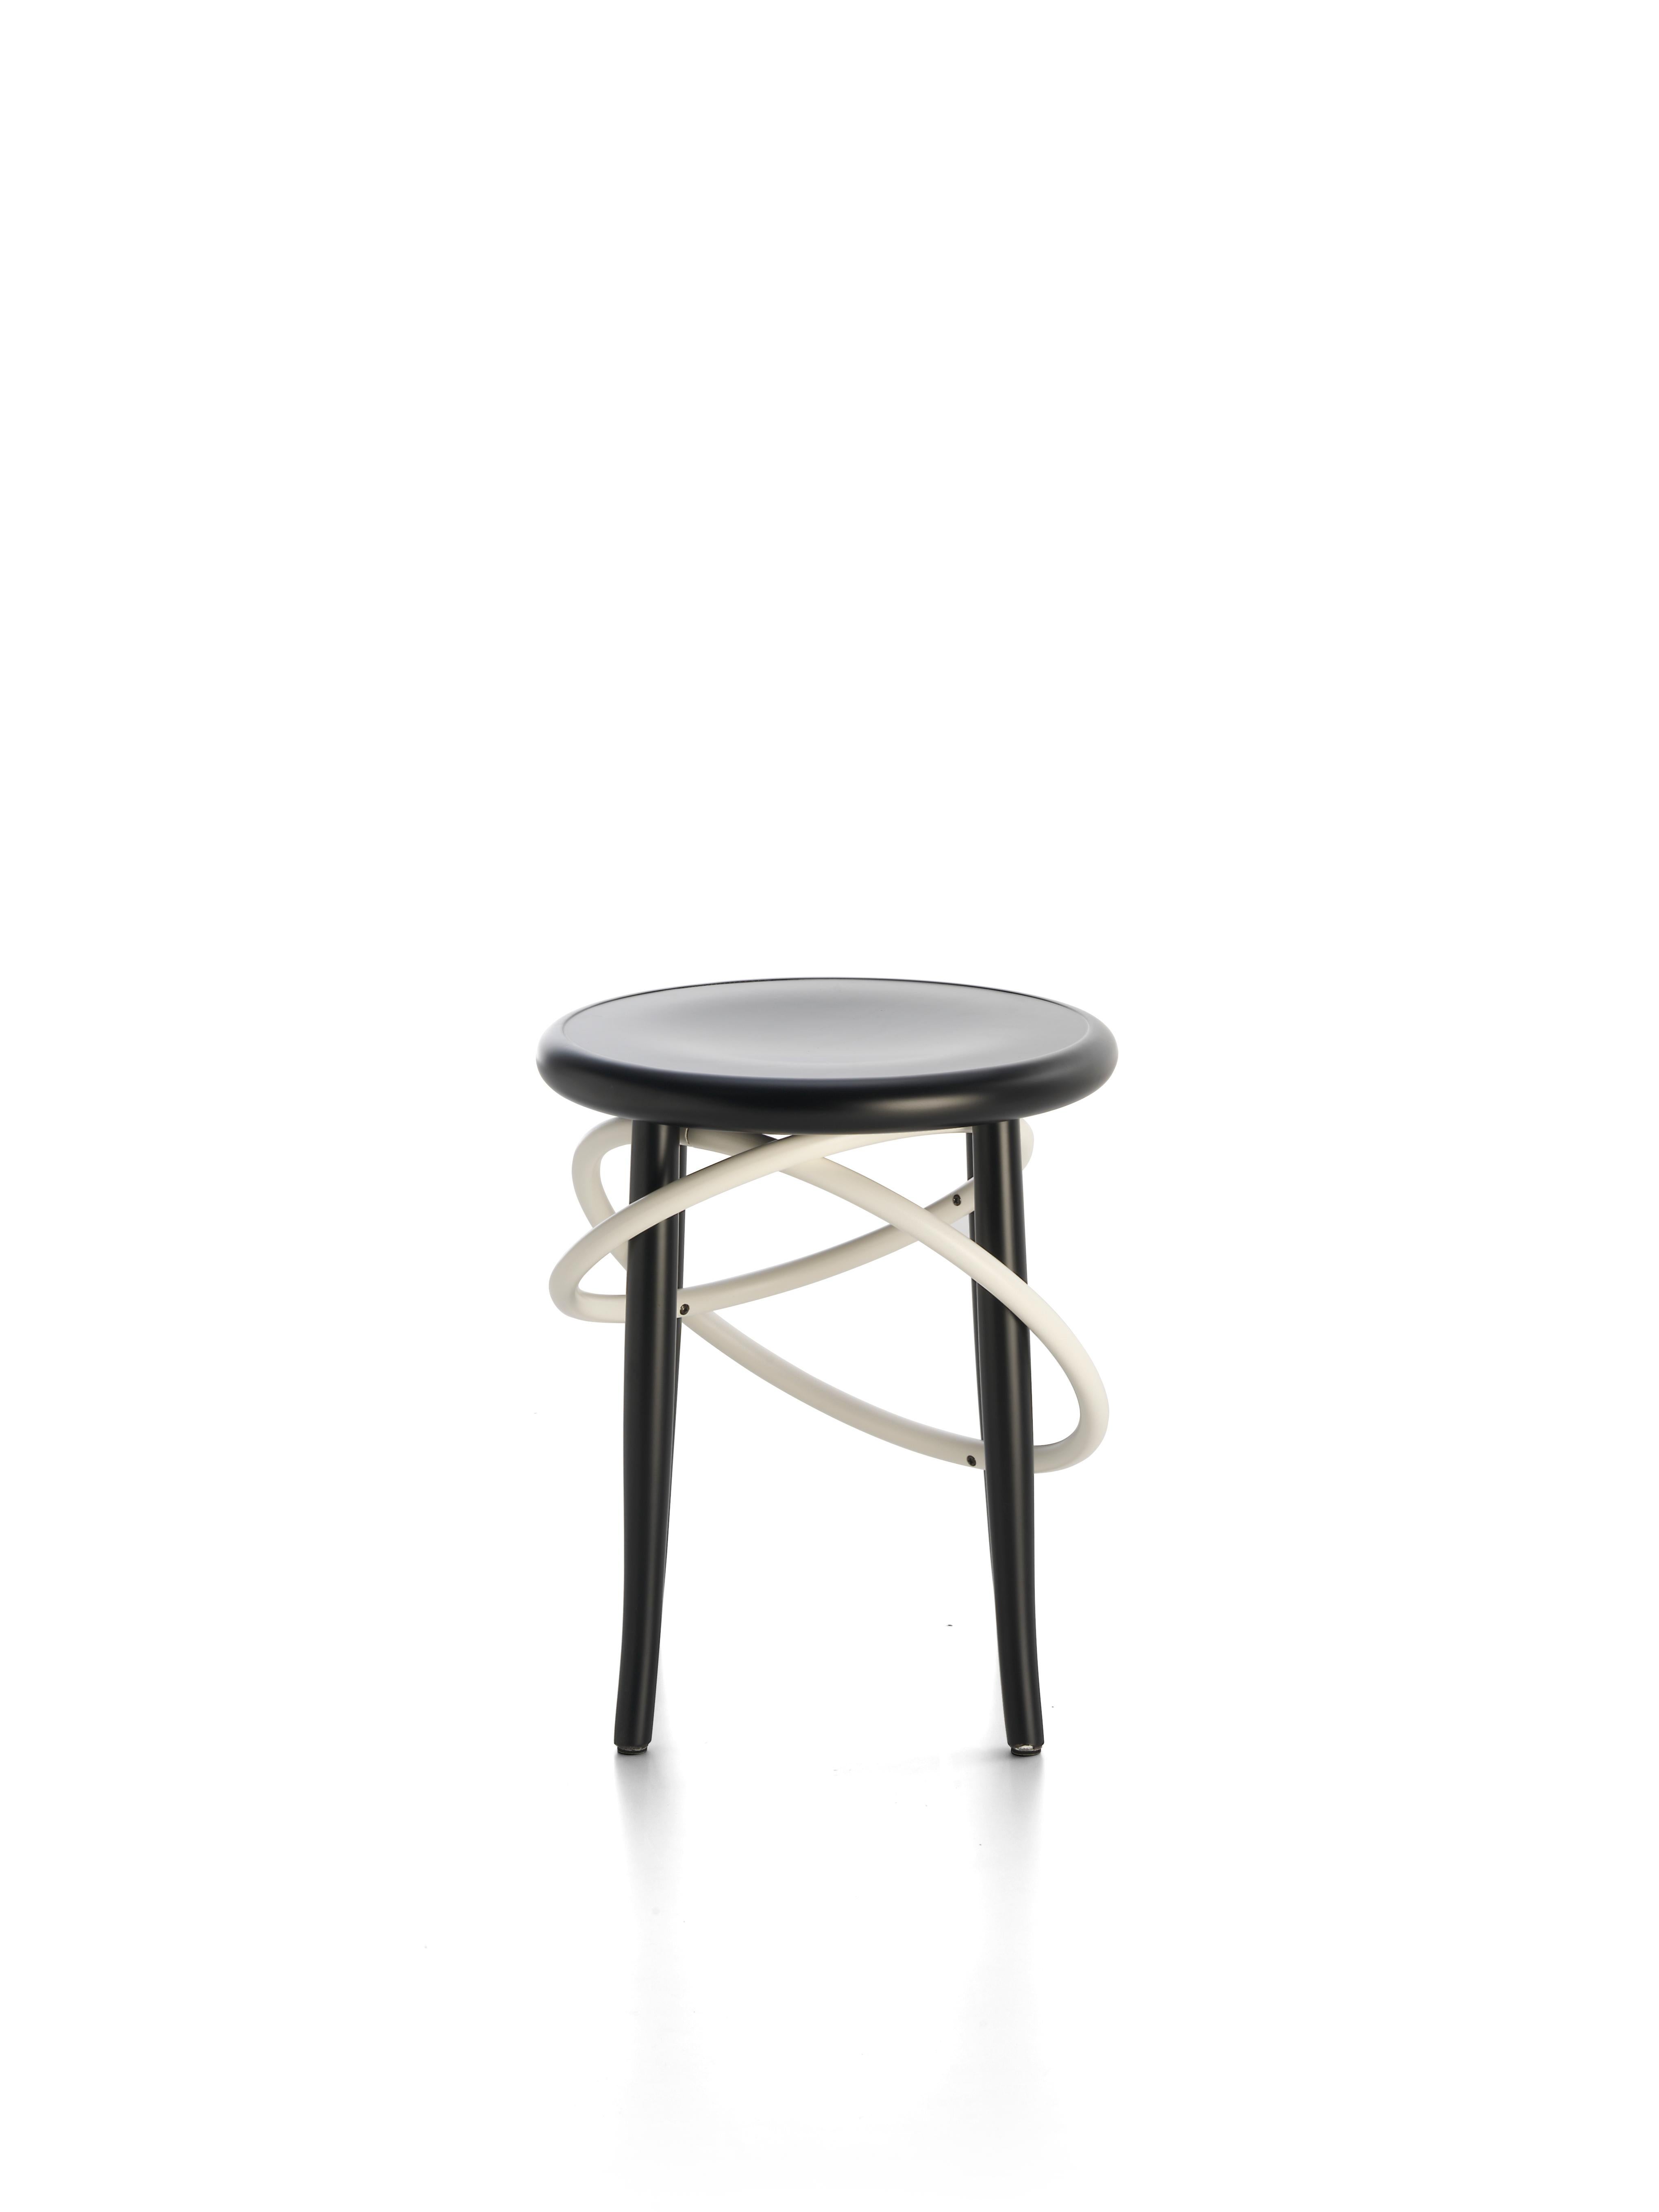 Modern Gebrüder Thonet Vienna GmbH Cirque Two Tone Low Stool in Black with White Rings For Sale